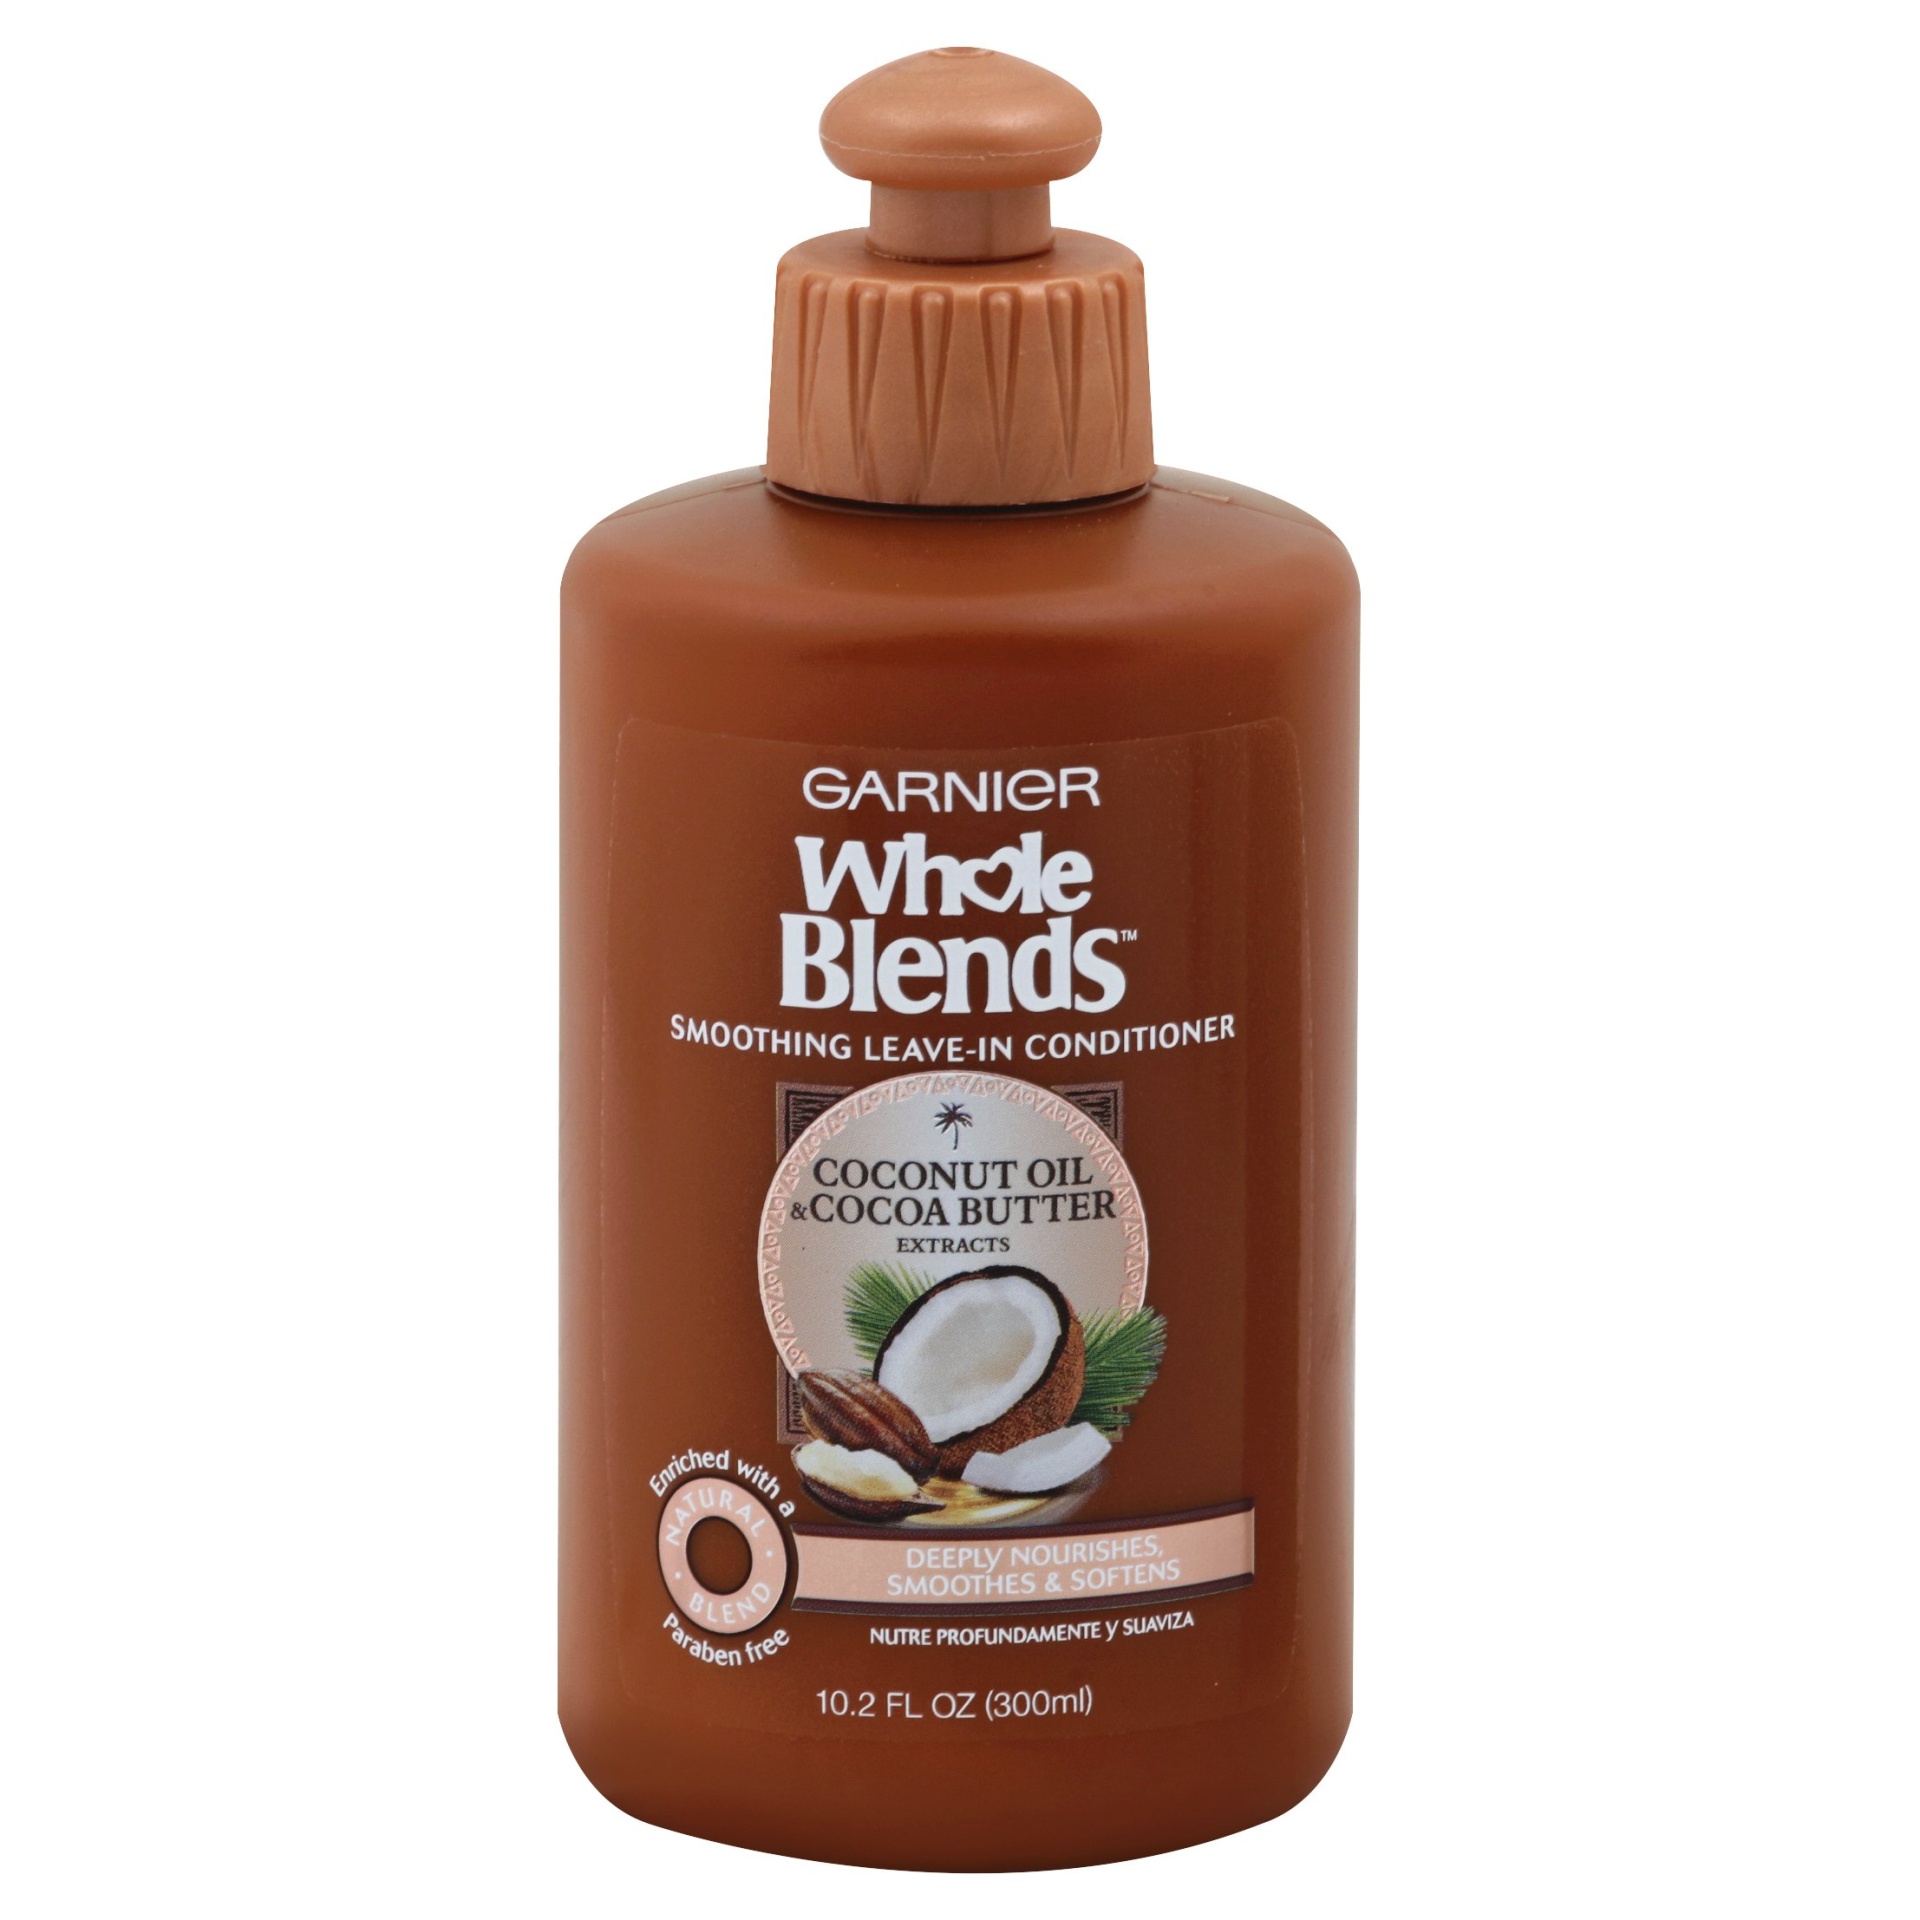 slide 1 of 1, Garnier Whole Blends Coconut Oil & Cocoa Butter Extracts Smoothing Leave In Conditioner, 10.2 fl oz